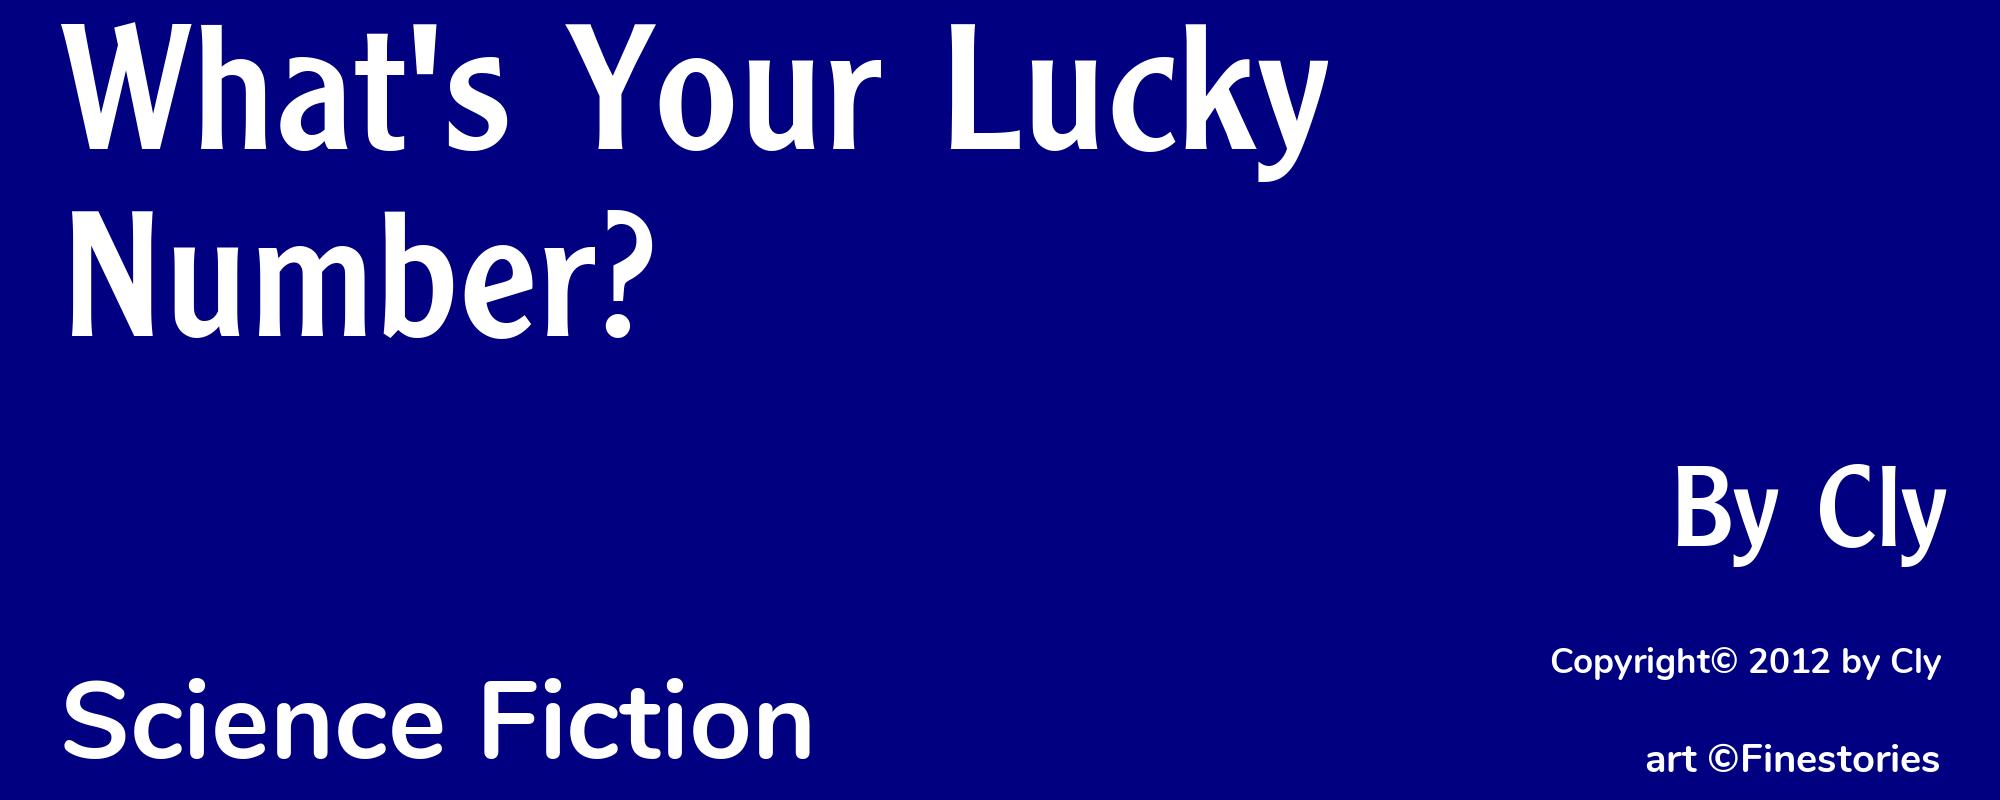 What's Your Lucky Number? - Cover